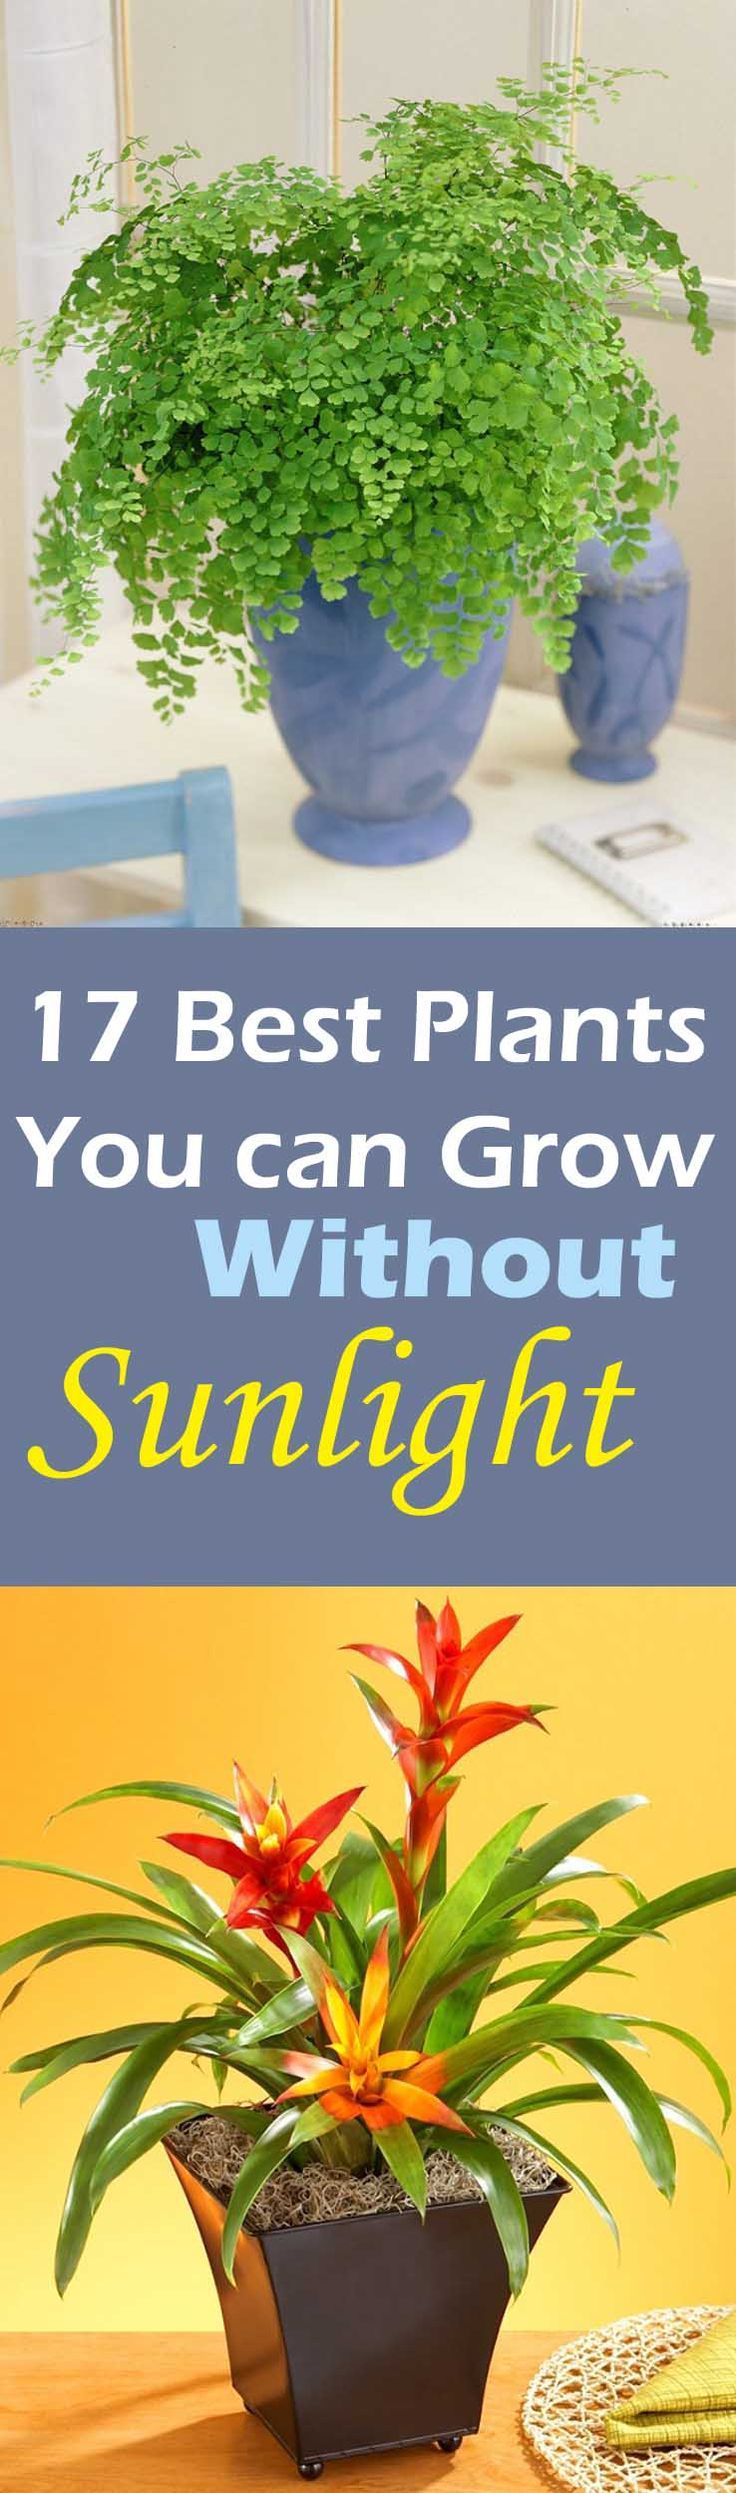 There are low light plants that grow without sunlight, they need indirect exposure, some even thrive in fluorescent light and here in this article we’ve listed 17 best plants to grow indoors.